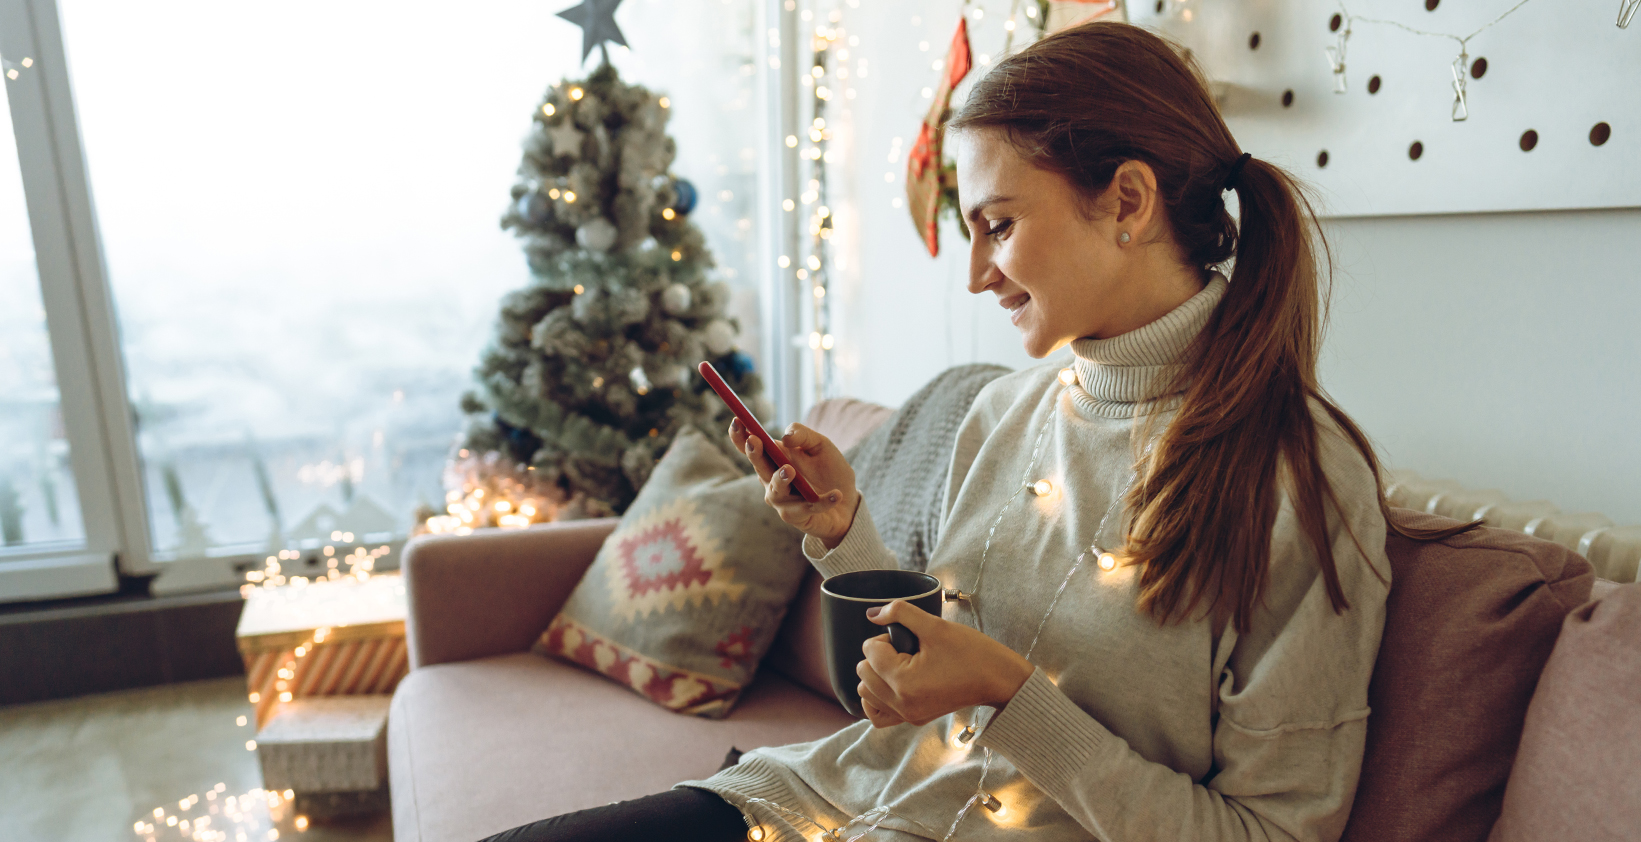 woman on her phone shopping around Christmas time as a result of a franchises marketing strategy for holidays